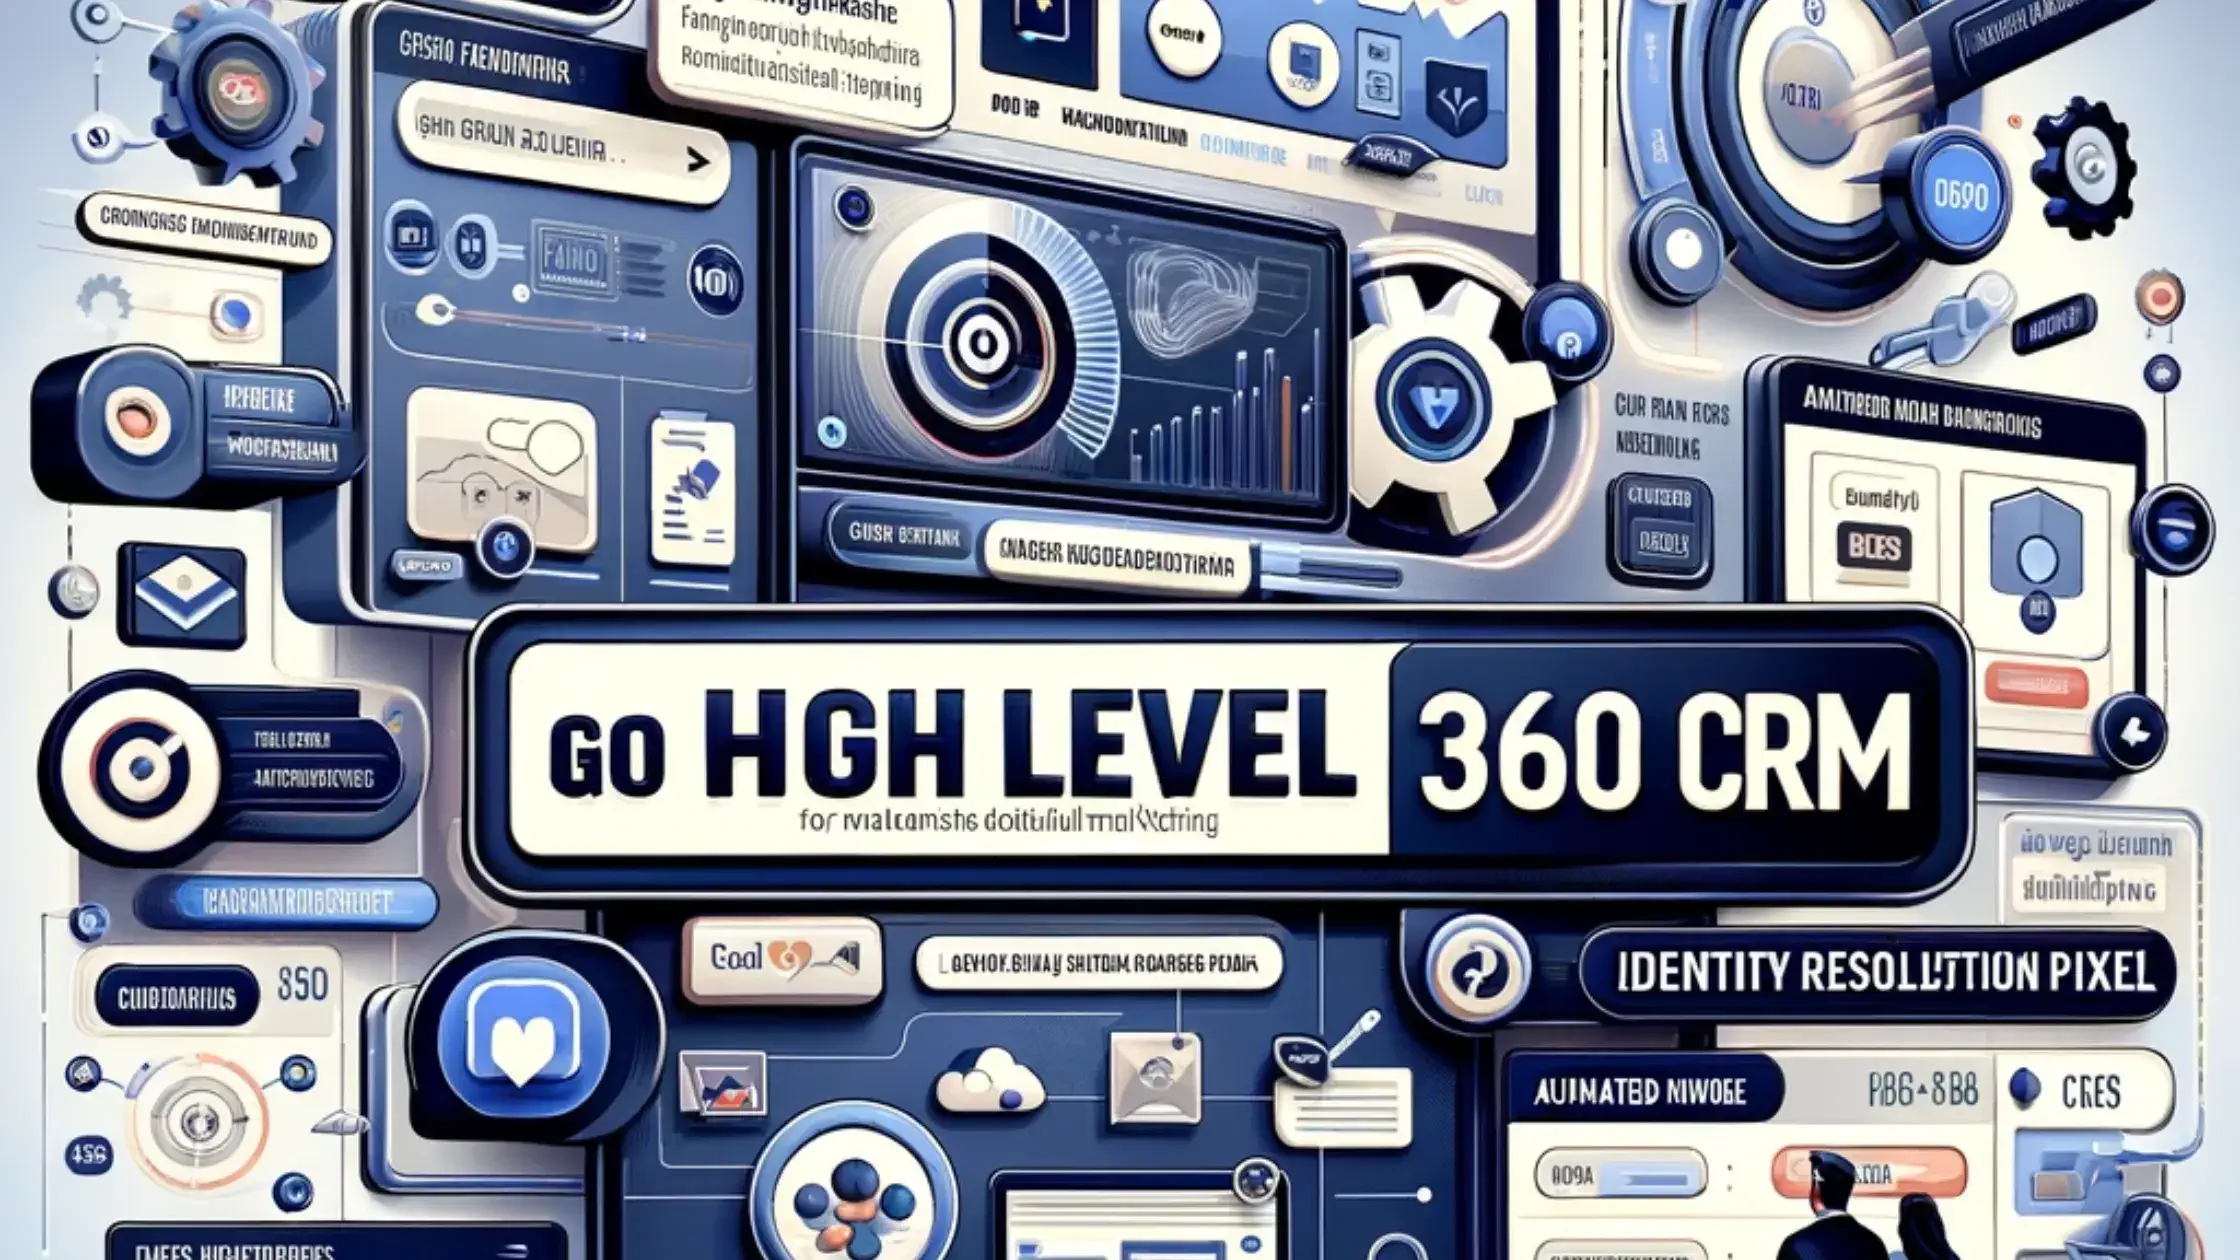 Gp High Level 360 CRM image about Go High Level 360 Identity Resolution Pixel